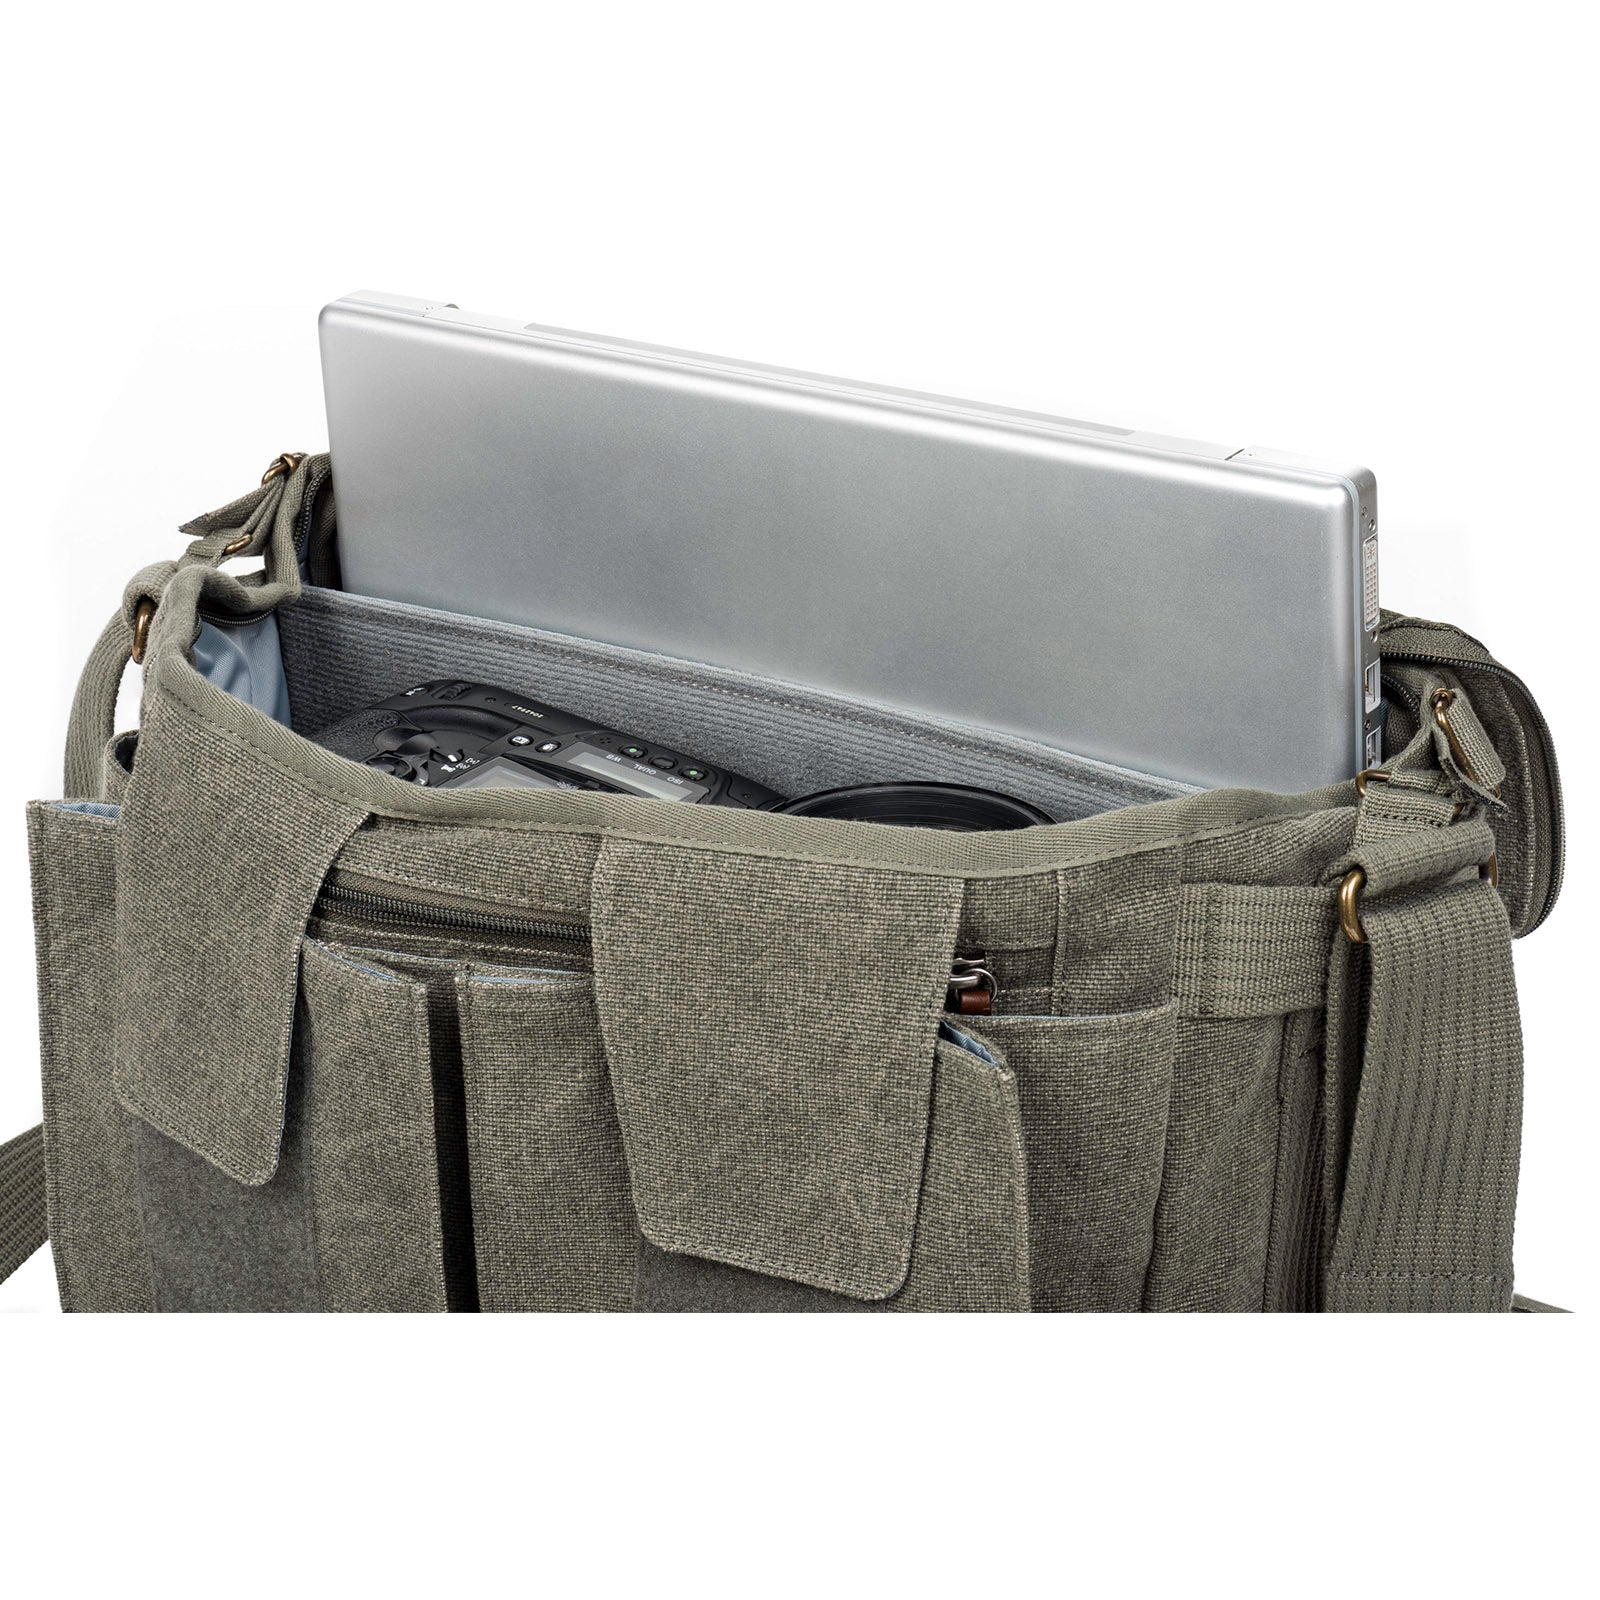 Dedicated pocket fits a tablet or up to a 15" laptop